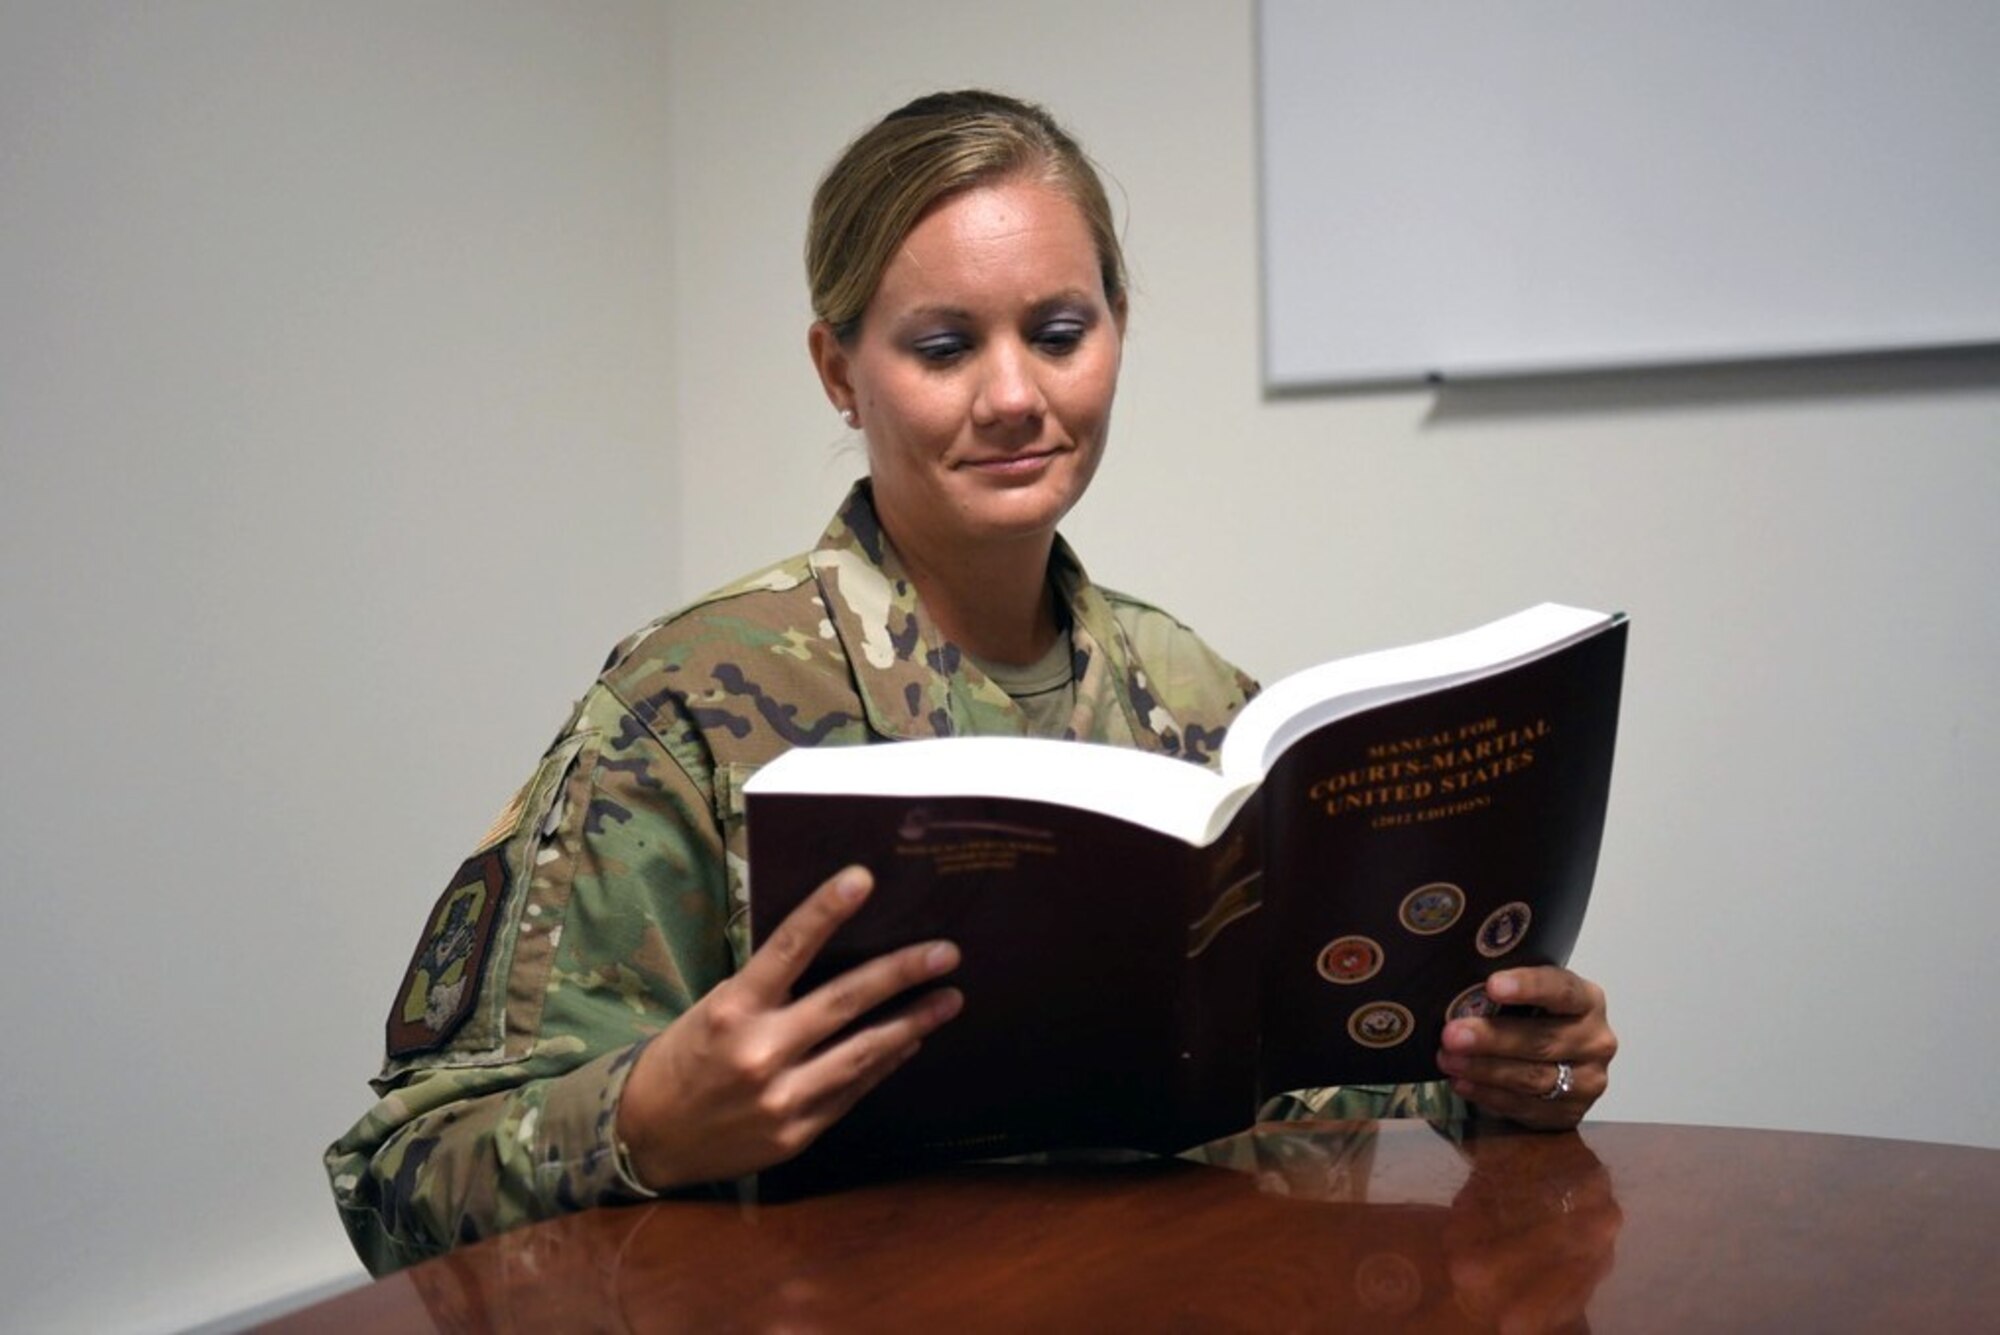 Senior Master Sgt. Erin Bouchane, the 178th Wing Law Office superintendent, reviews the Uniform Code of Military Justice.